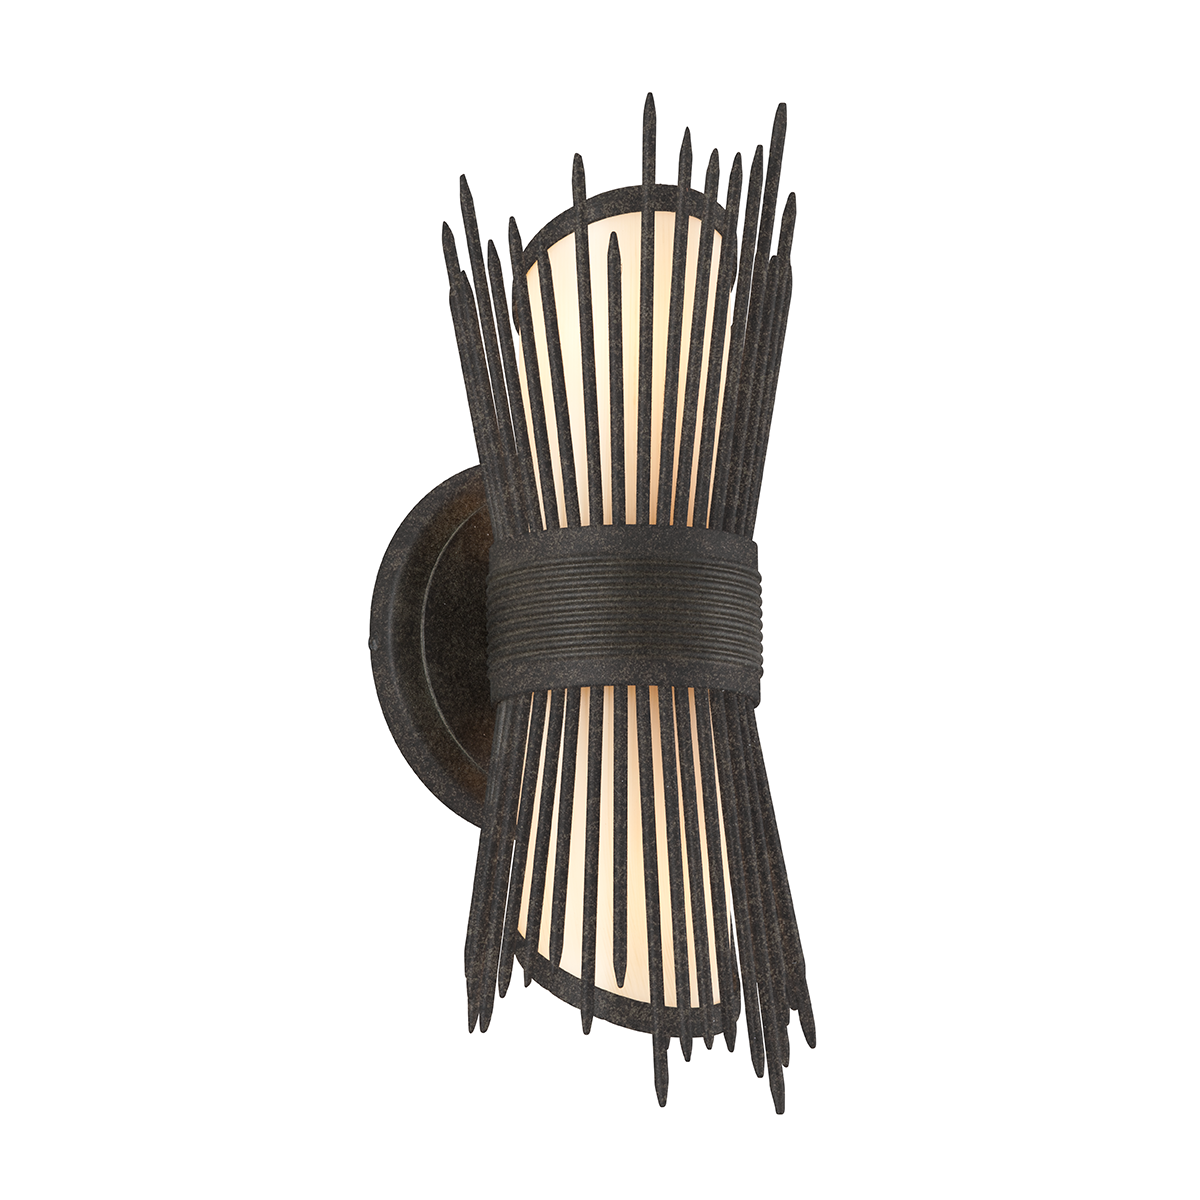 Troy Lighting Blink Wall Sconce Wall Sconce Troy Lighting FRENCH IRON 5.5x5.5x14 